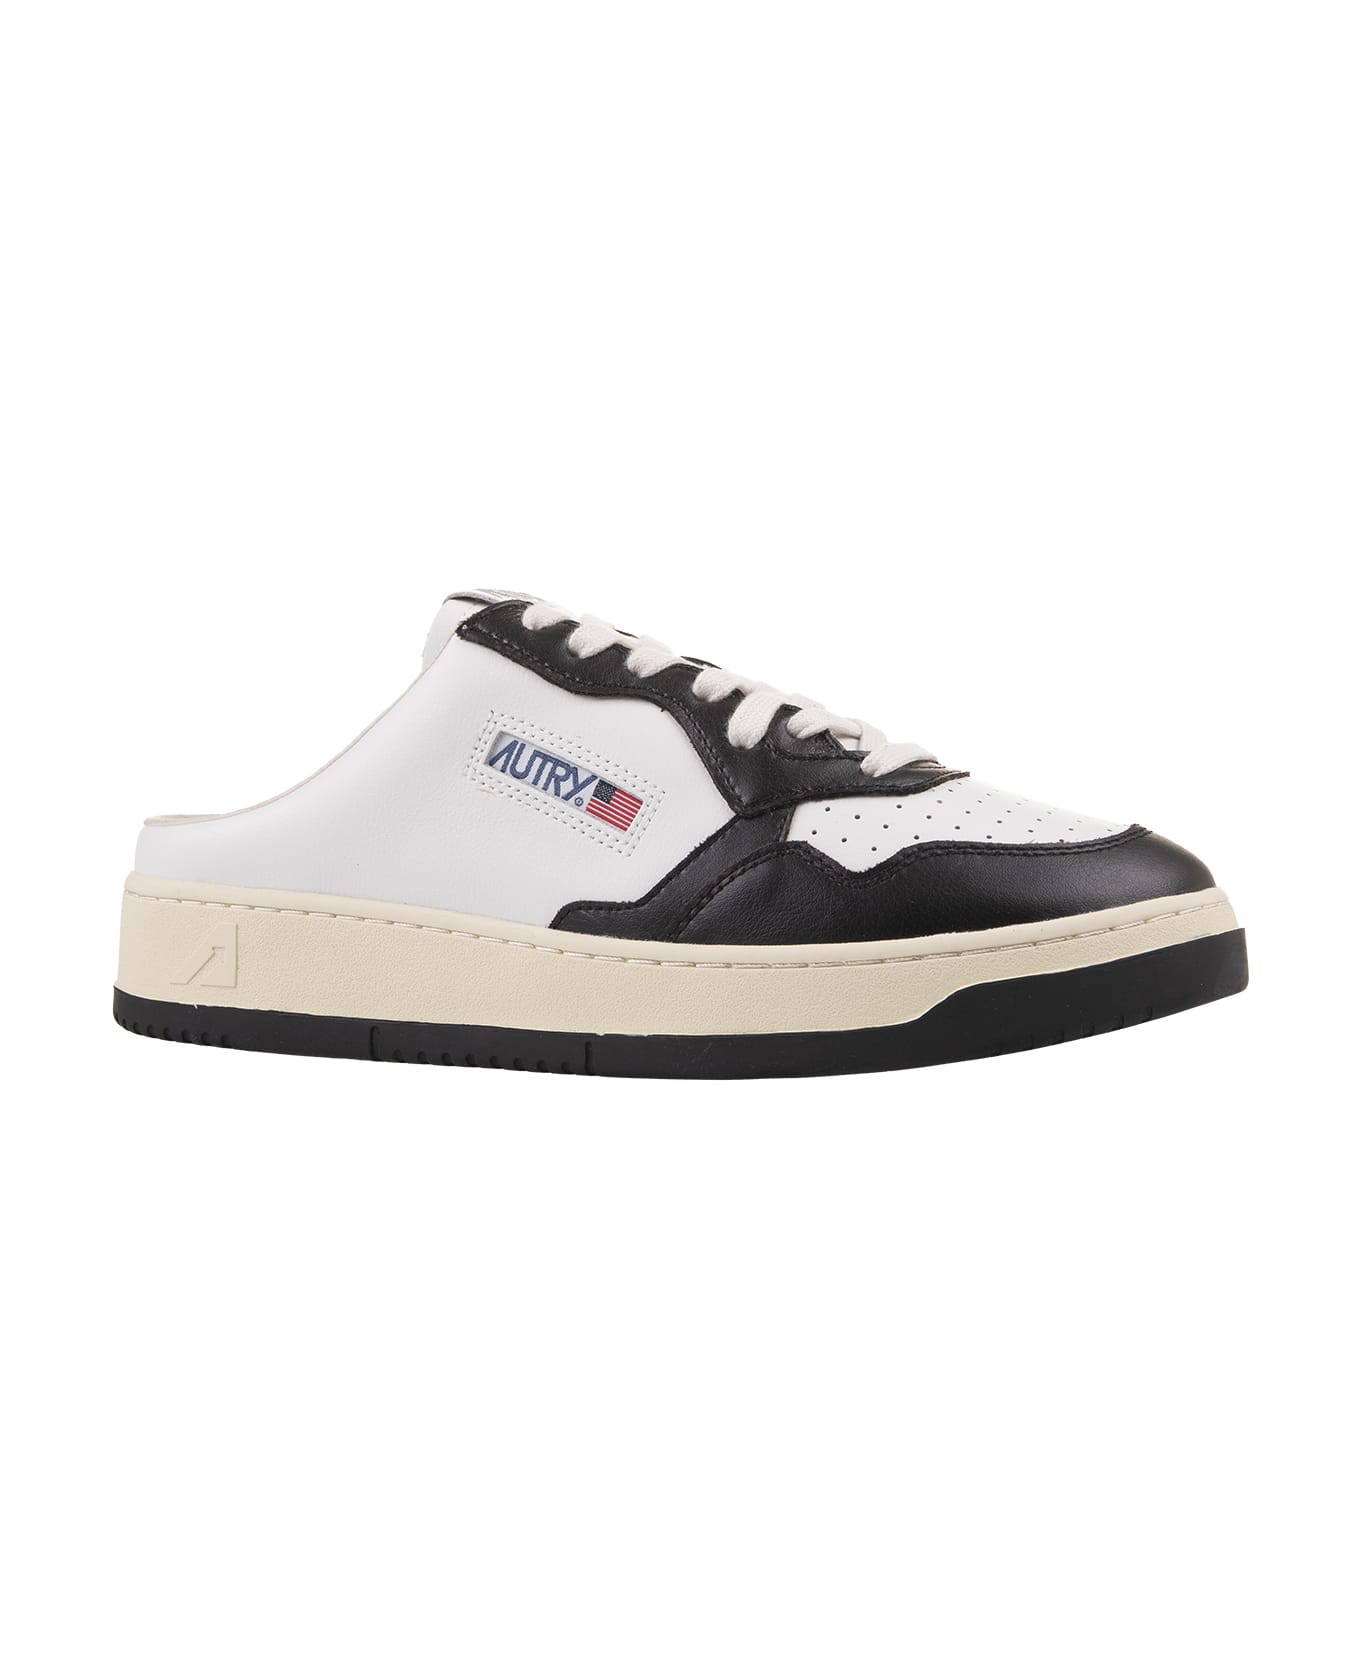 Autry White And Black Medalist Mule Sneakers - White/black